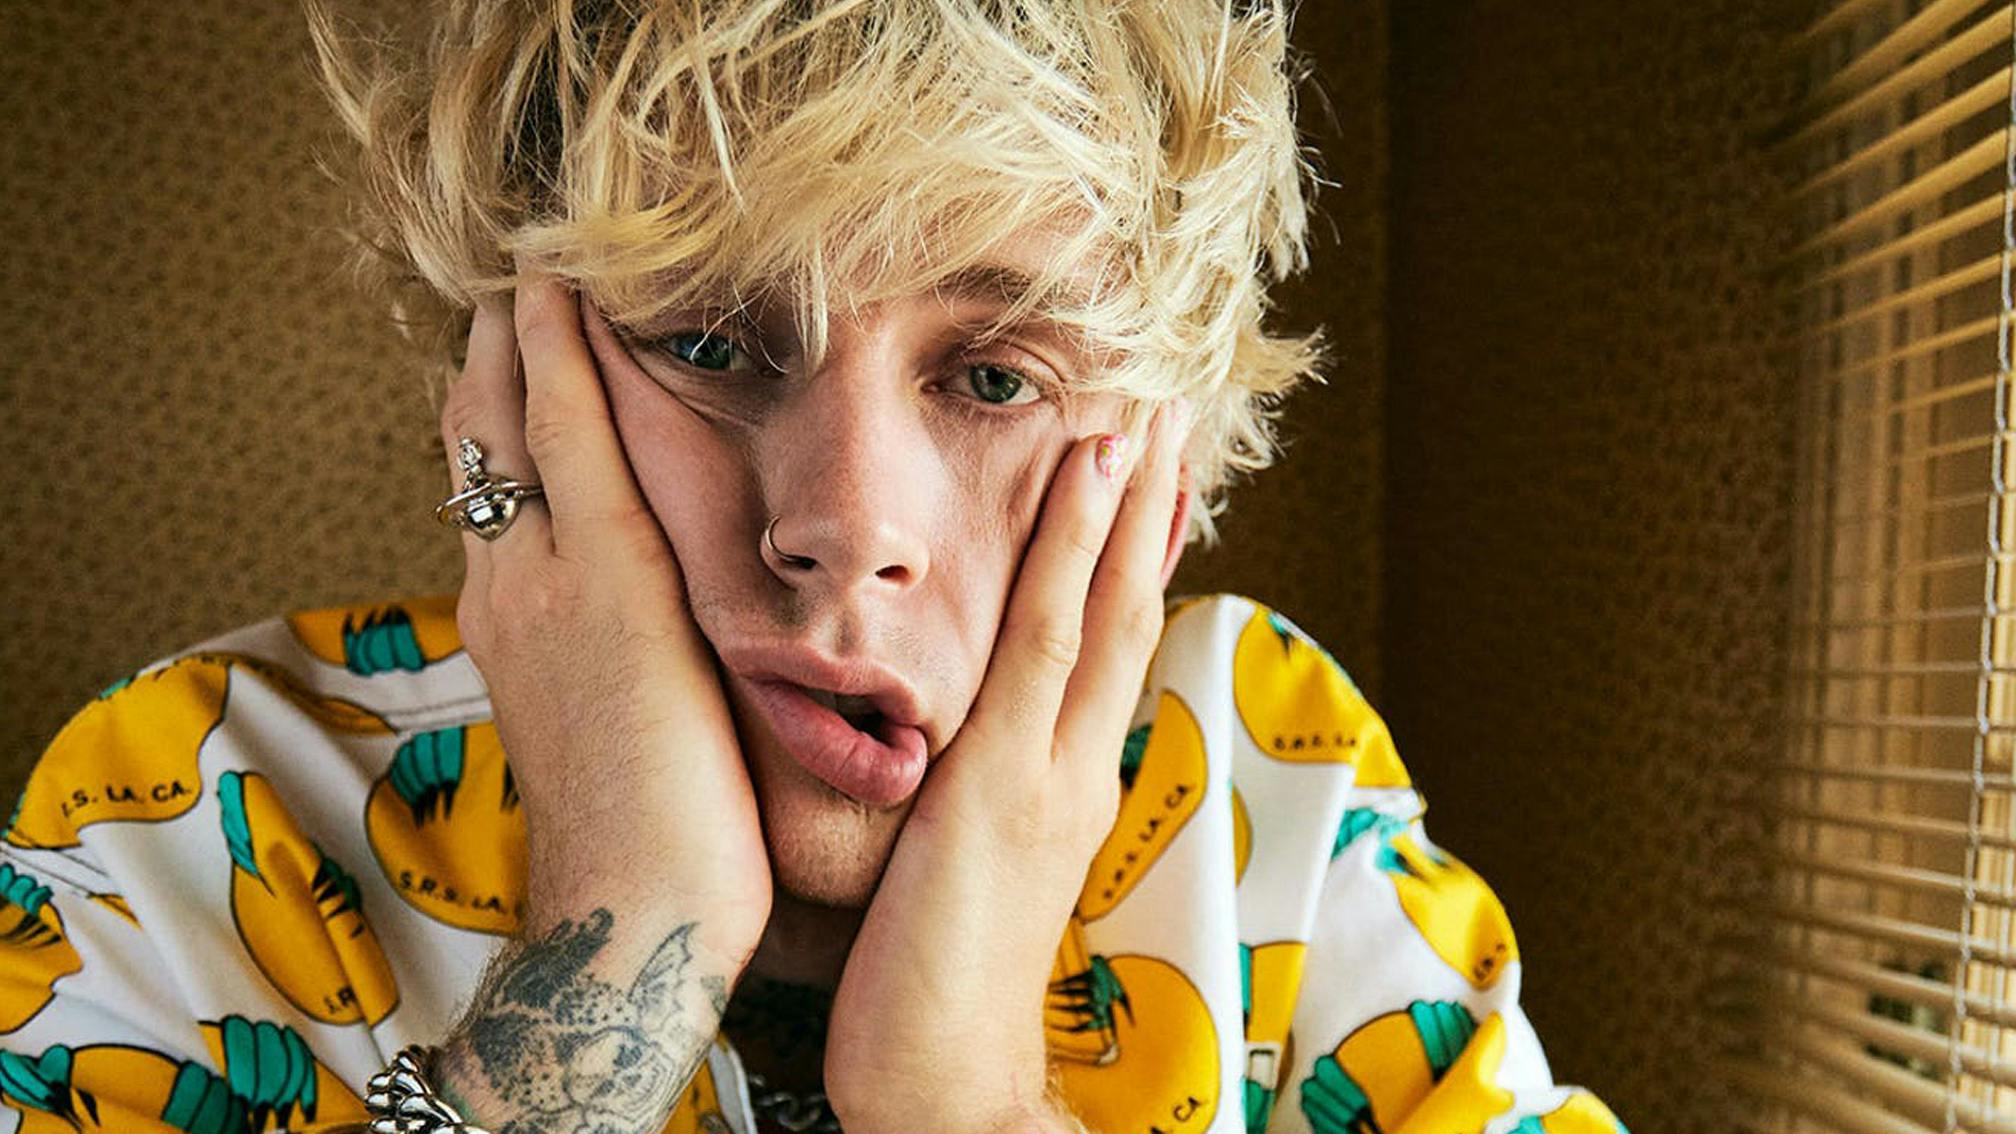 Machine Gun Kelly confirms he’s releasing new music in August